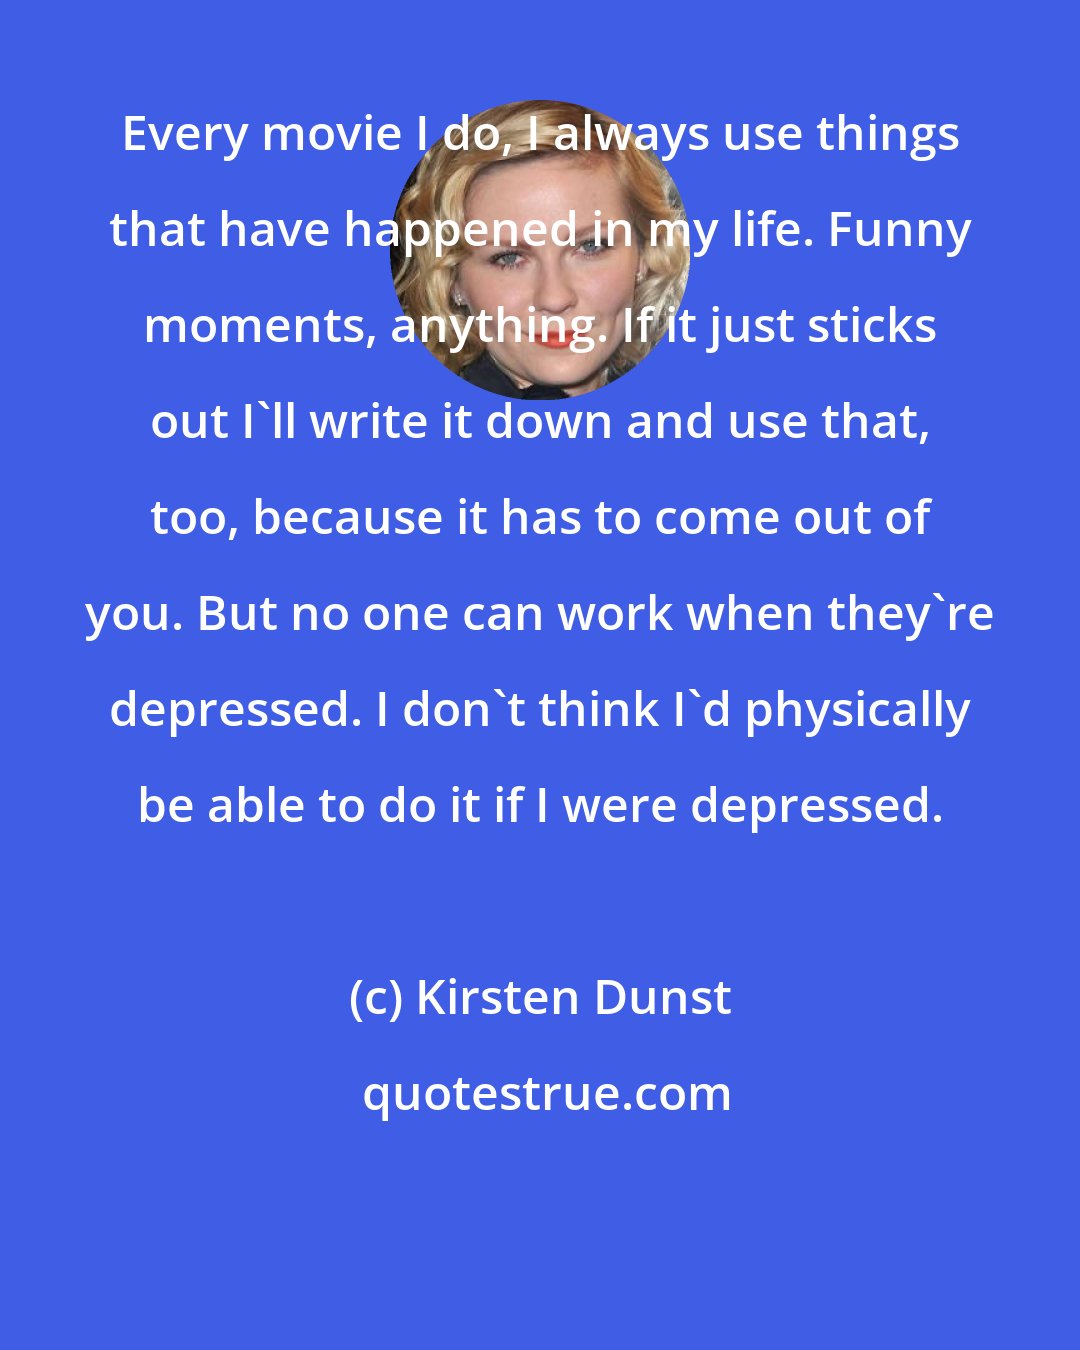 Kirsten Dunst: Every movie I do, I always use things that have happened in my life. Funny moments, anything. If it just sticks out I'll write it down and use that, too, because it has to come out of you. But no one can work when they're depressed. I don't think I'd physically be able to do it if I were depressed.